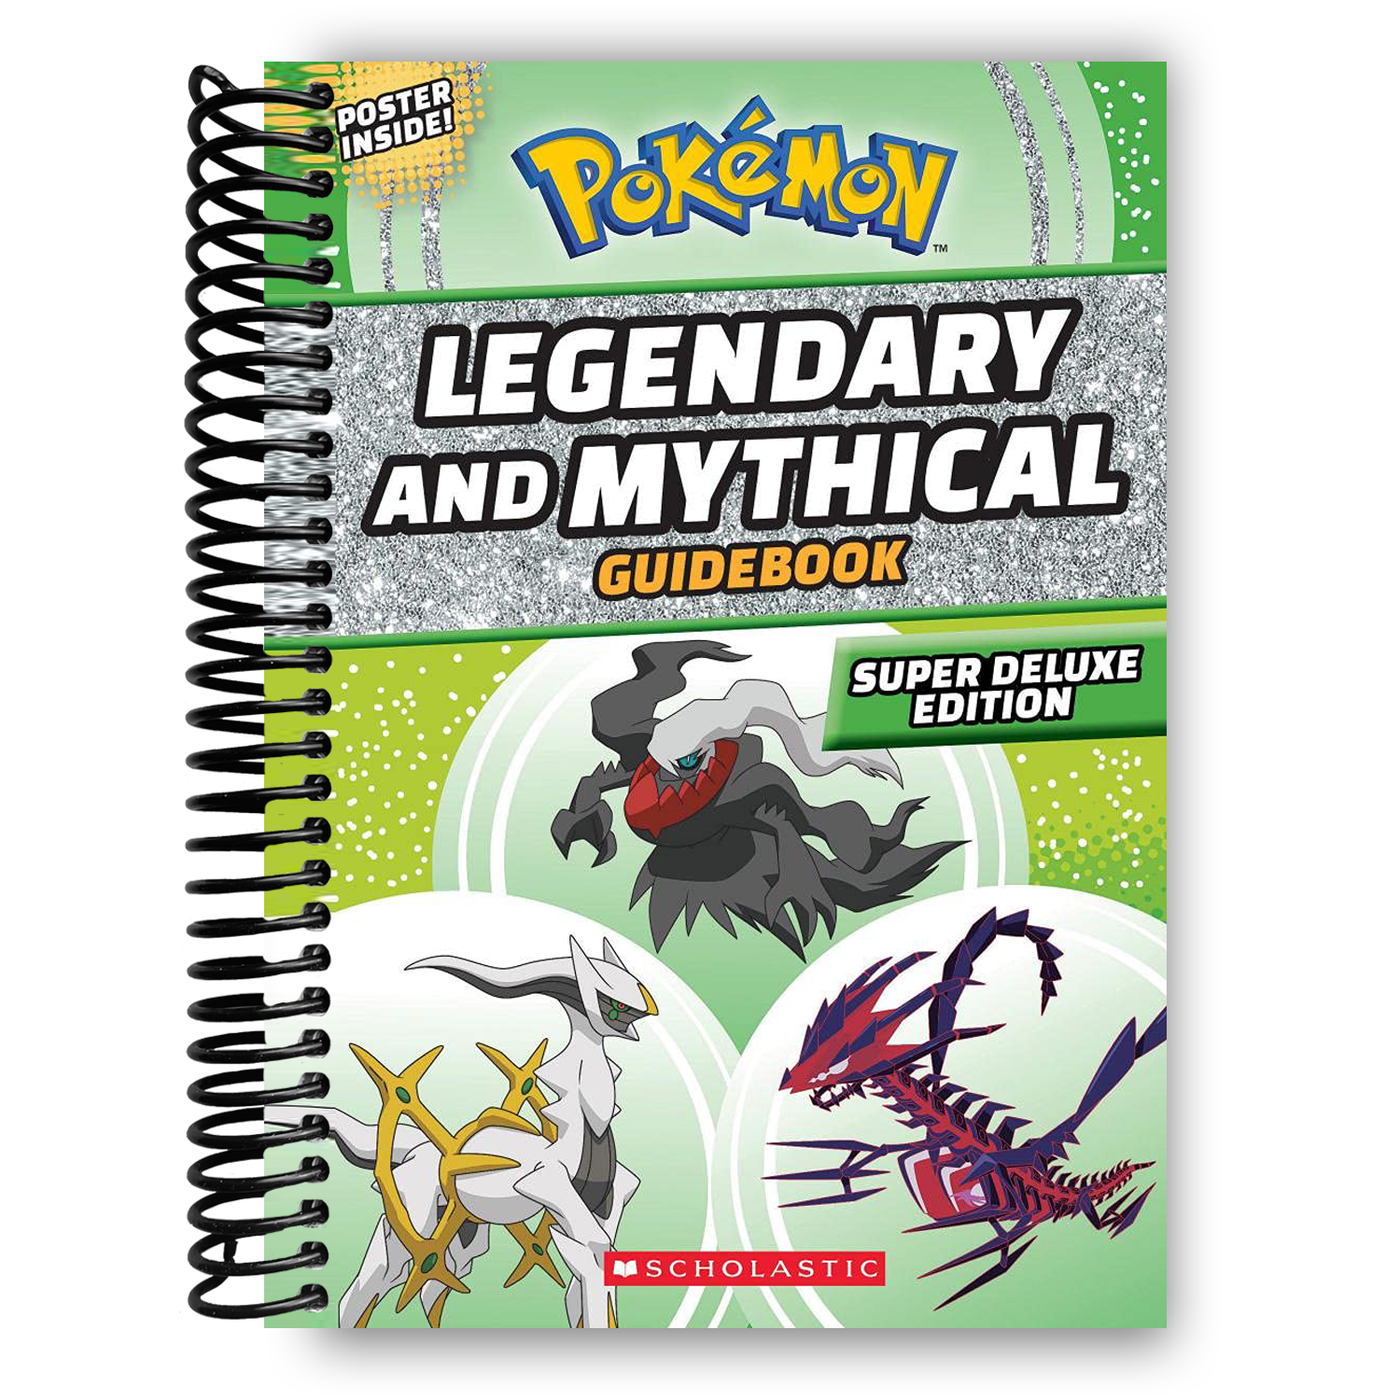 Legendary and Mythical Guidebook: Super Deluxe Edition (Pok√©mon) (Spiral Bound)